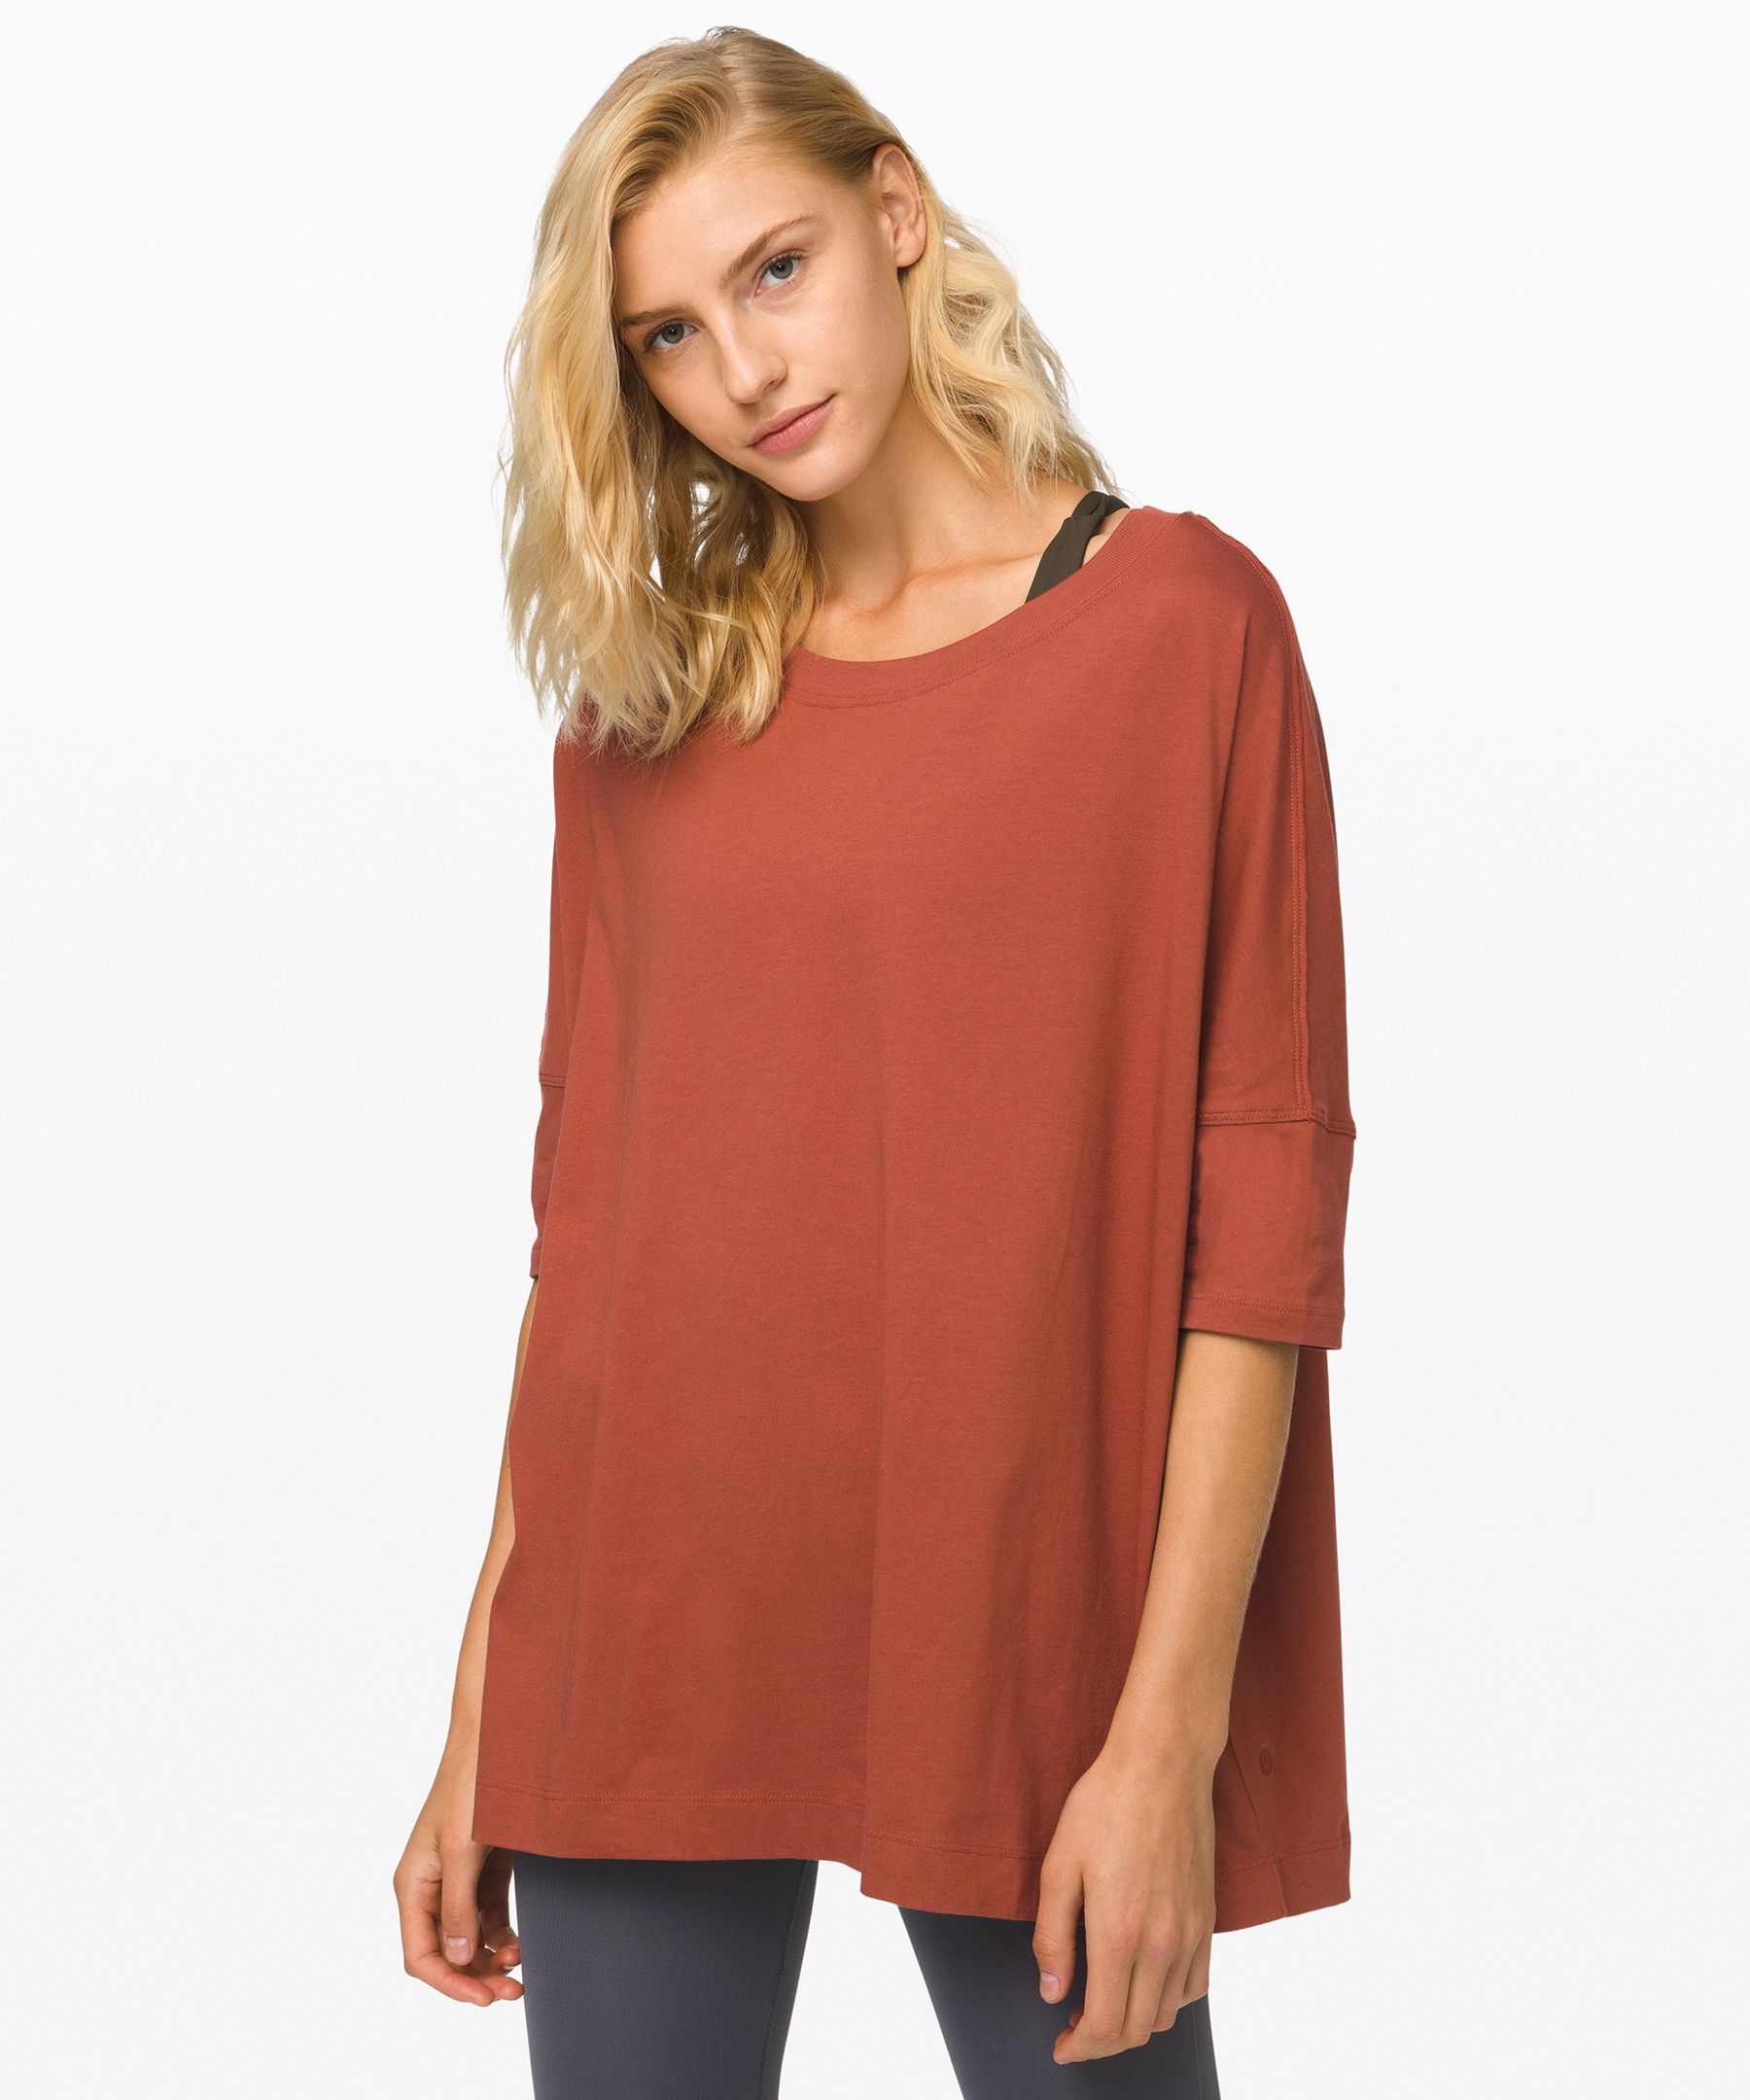 Lululemon All Yours Boyfriend Box Tee In Rustic Clay